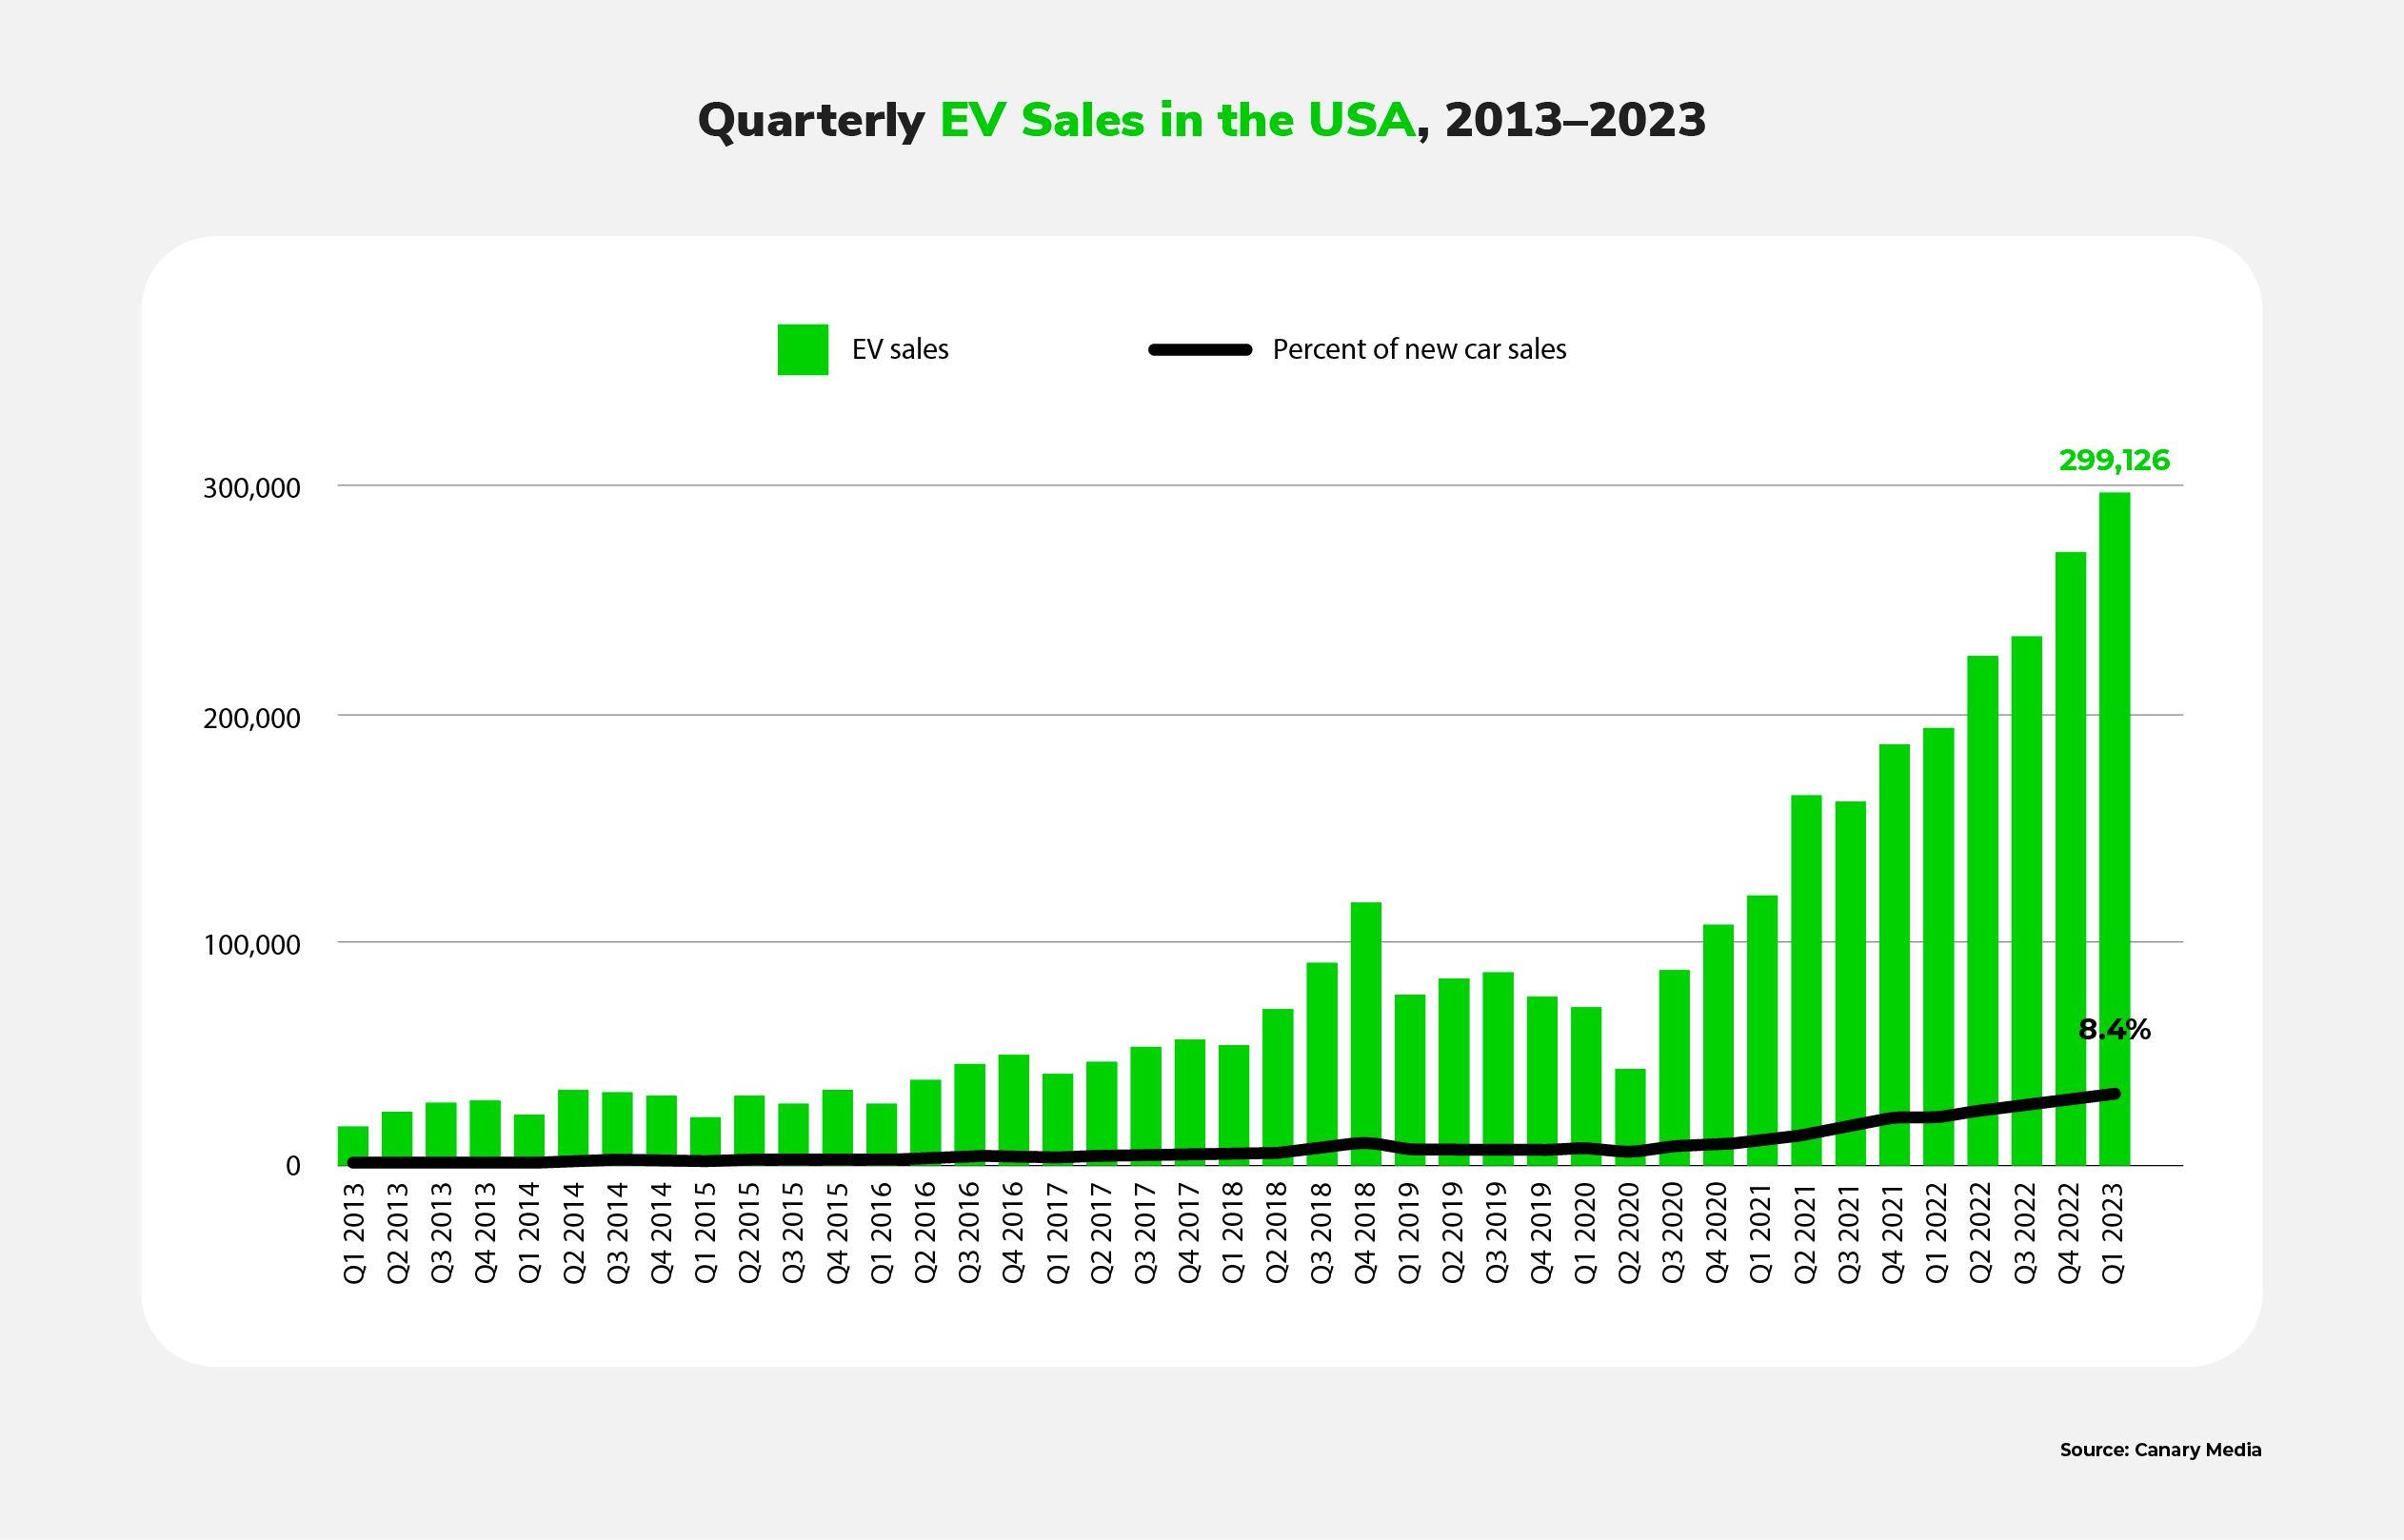 A bar chart showing quarterly EV sales in the USA between 2013 and 2023